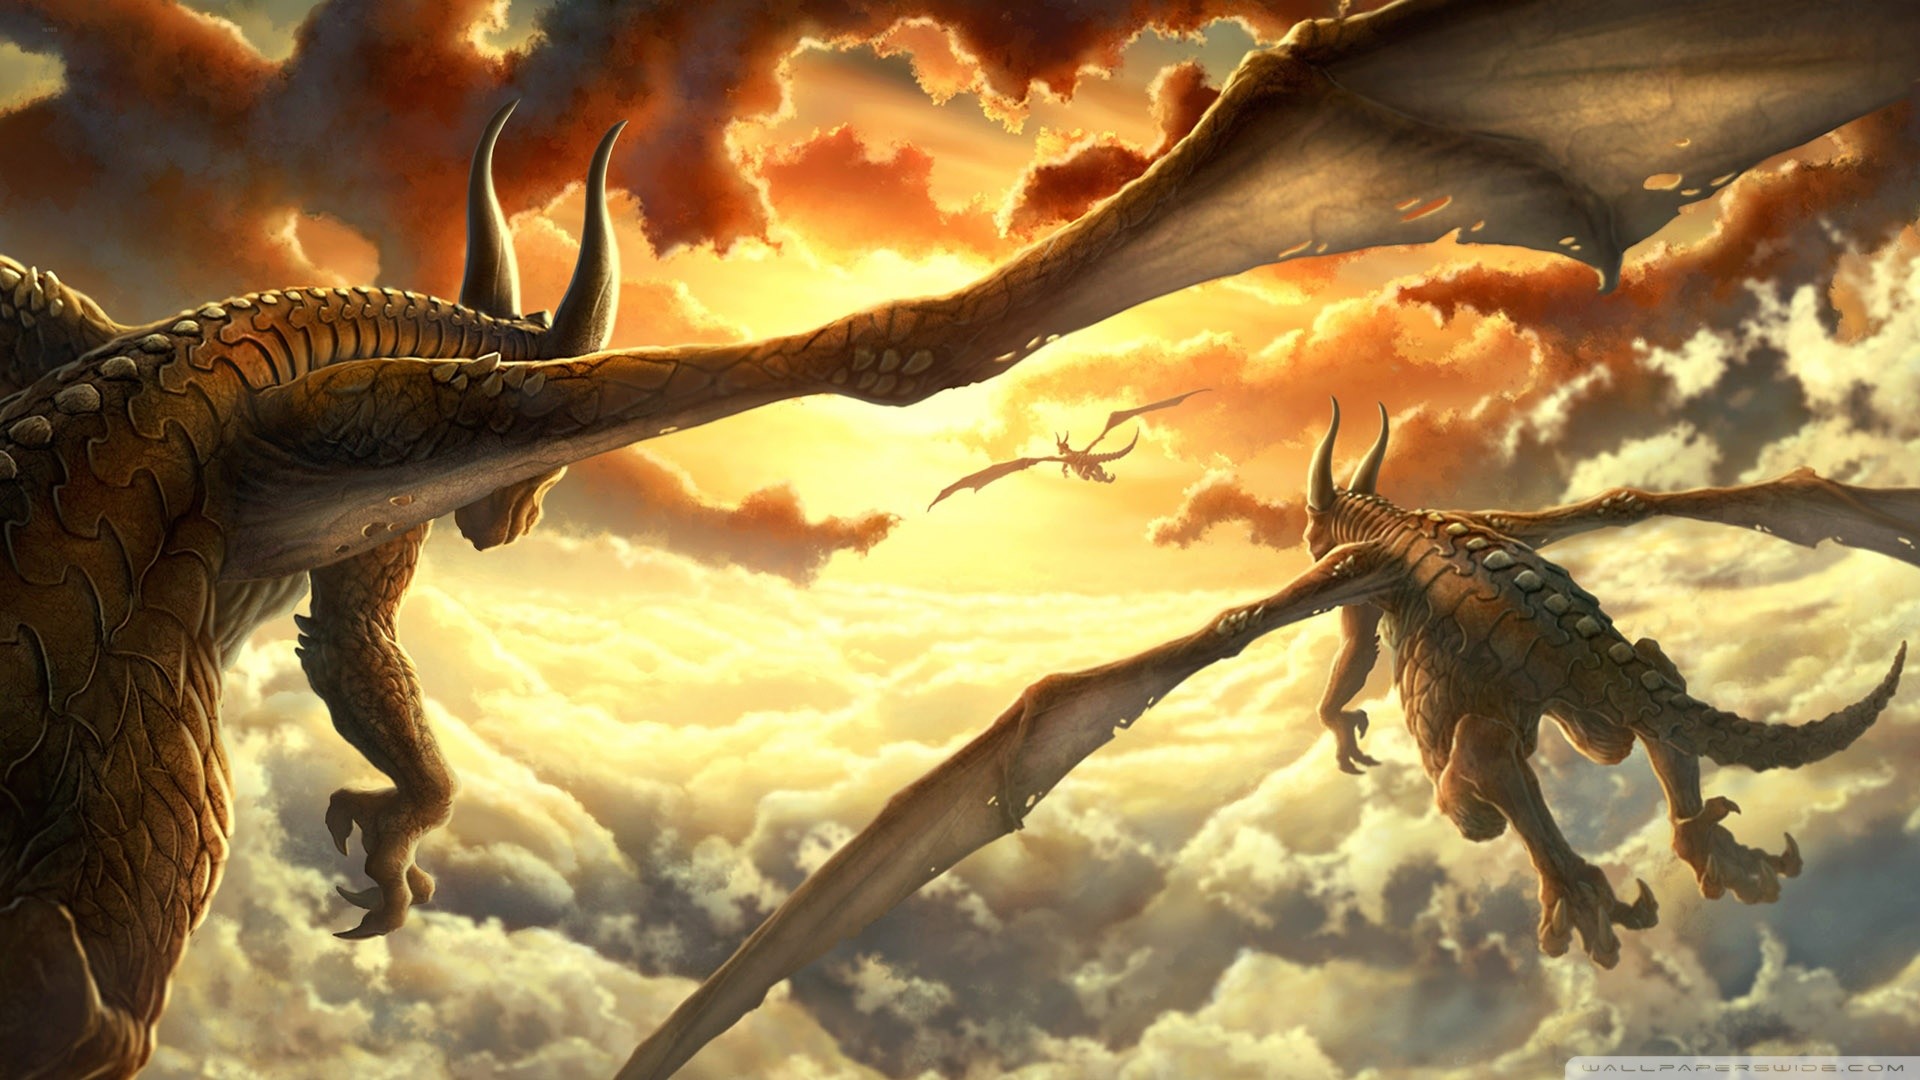 1920x1080 Dragons wallpaper Gallery| Beautiful and Interesting  Images,Vectors,Coloring,Cliparts |Free Hd wallpapers